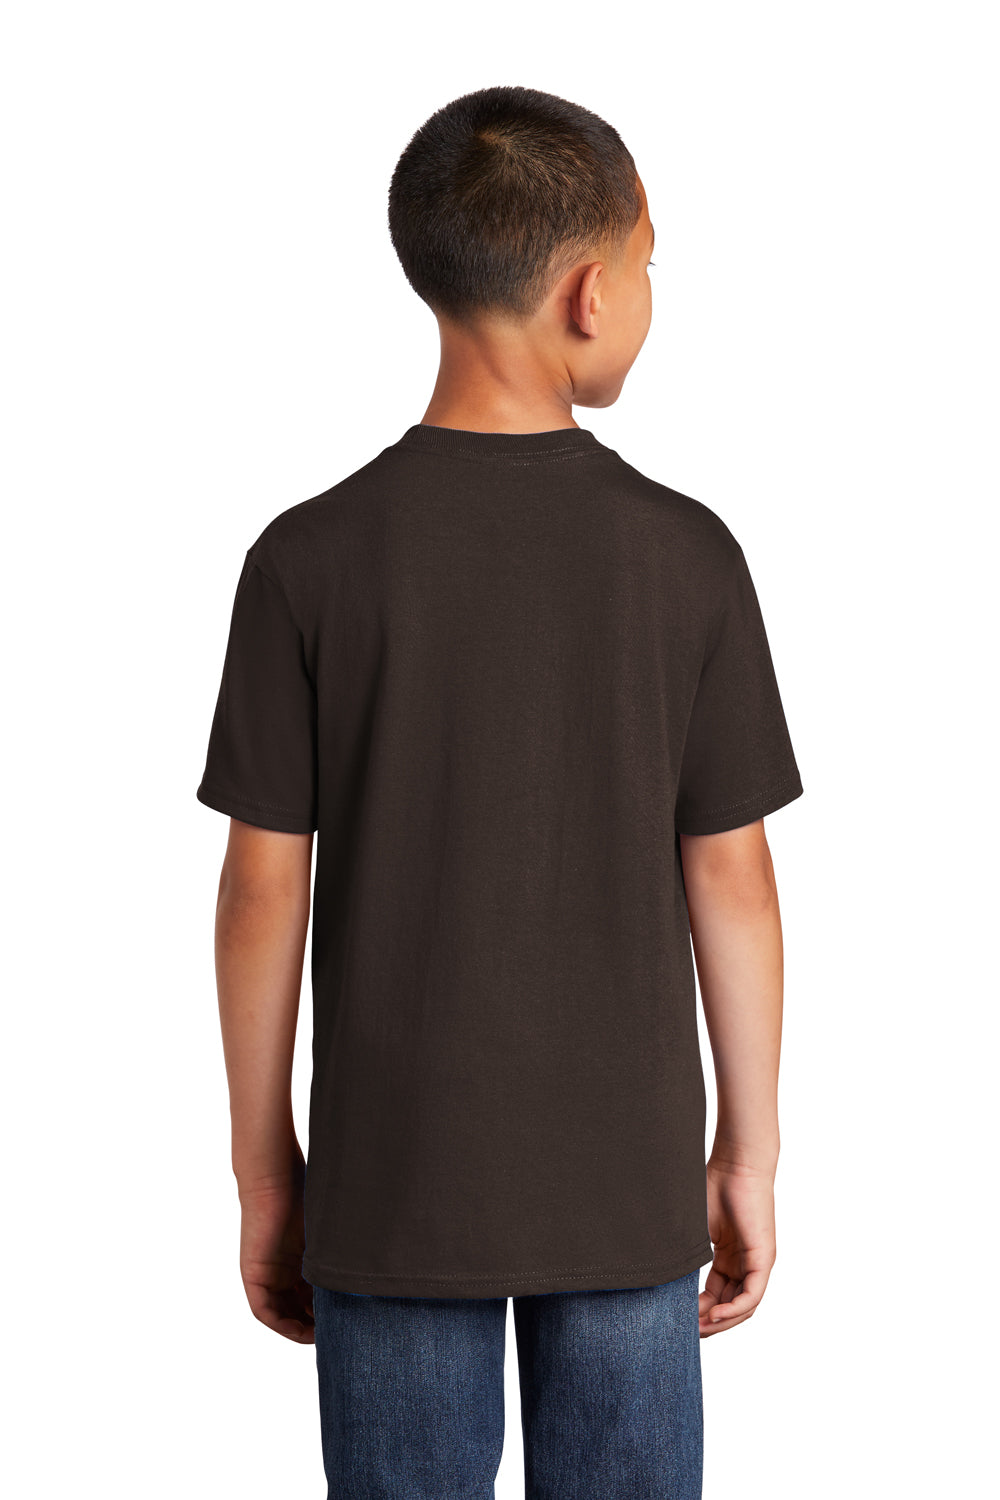 Port & Company PC54Y Youth Core Short Sleeve Crewneck T-Shirt Chocolate Brown Back